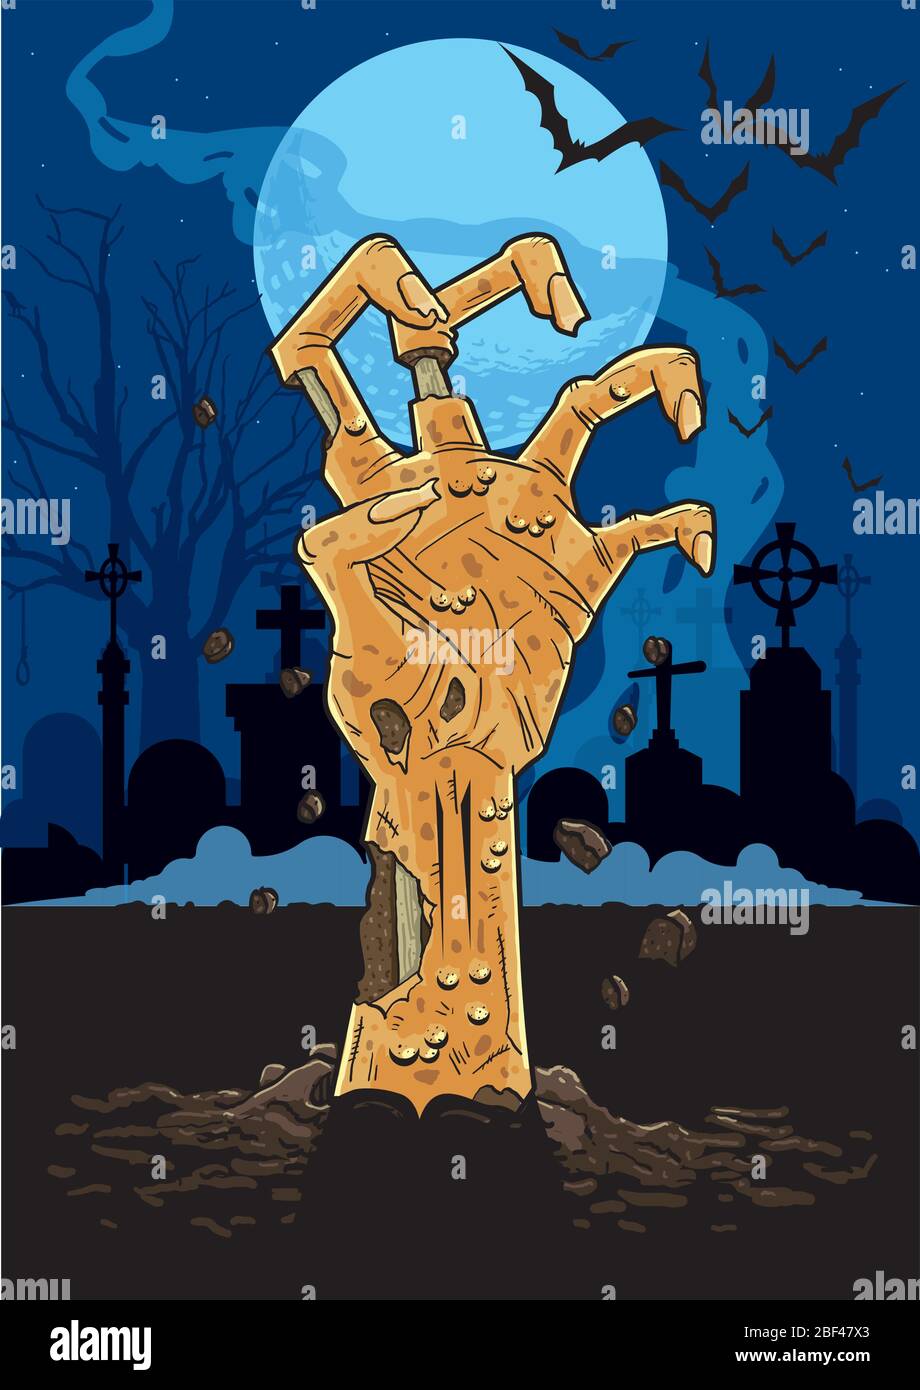 Illustration of zombie hand in a cemetary at night pushing up out of the ground in front of gravestones under the moonlight. Stock Vector